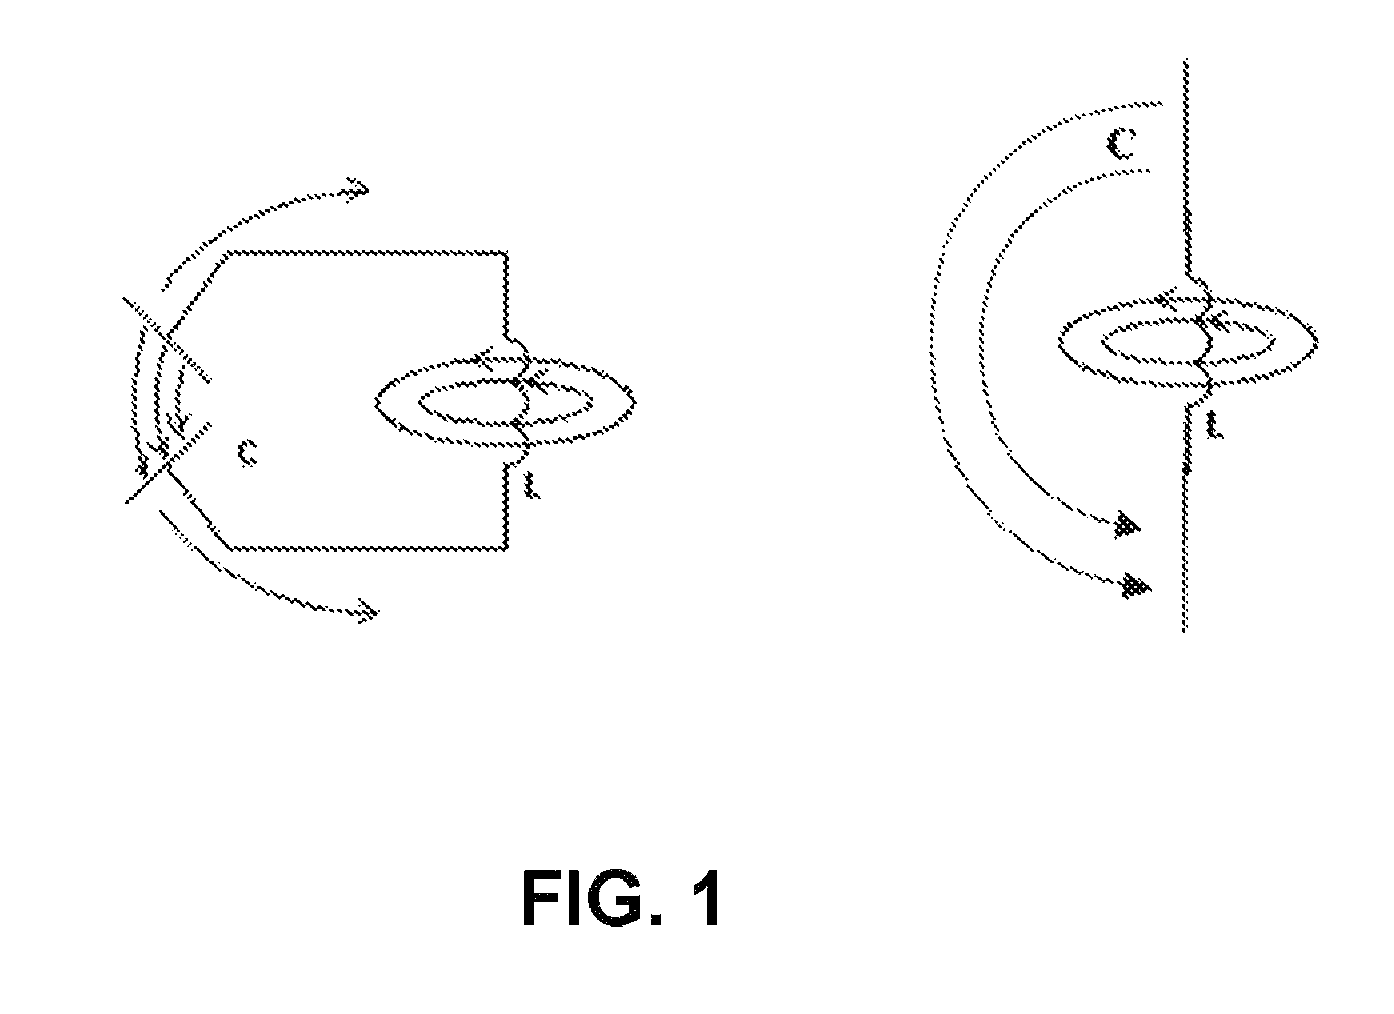 Electrode catheter for interventional use